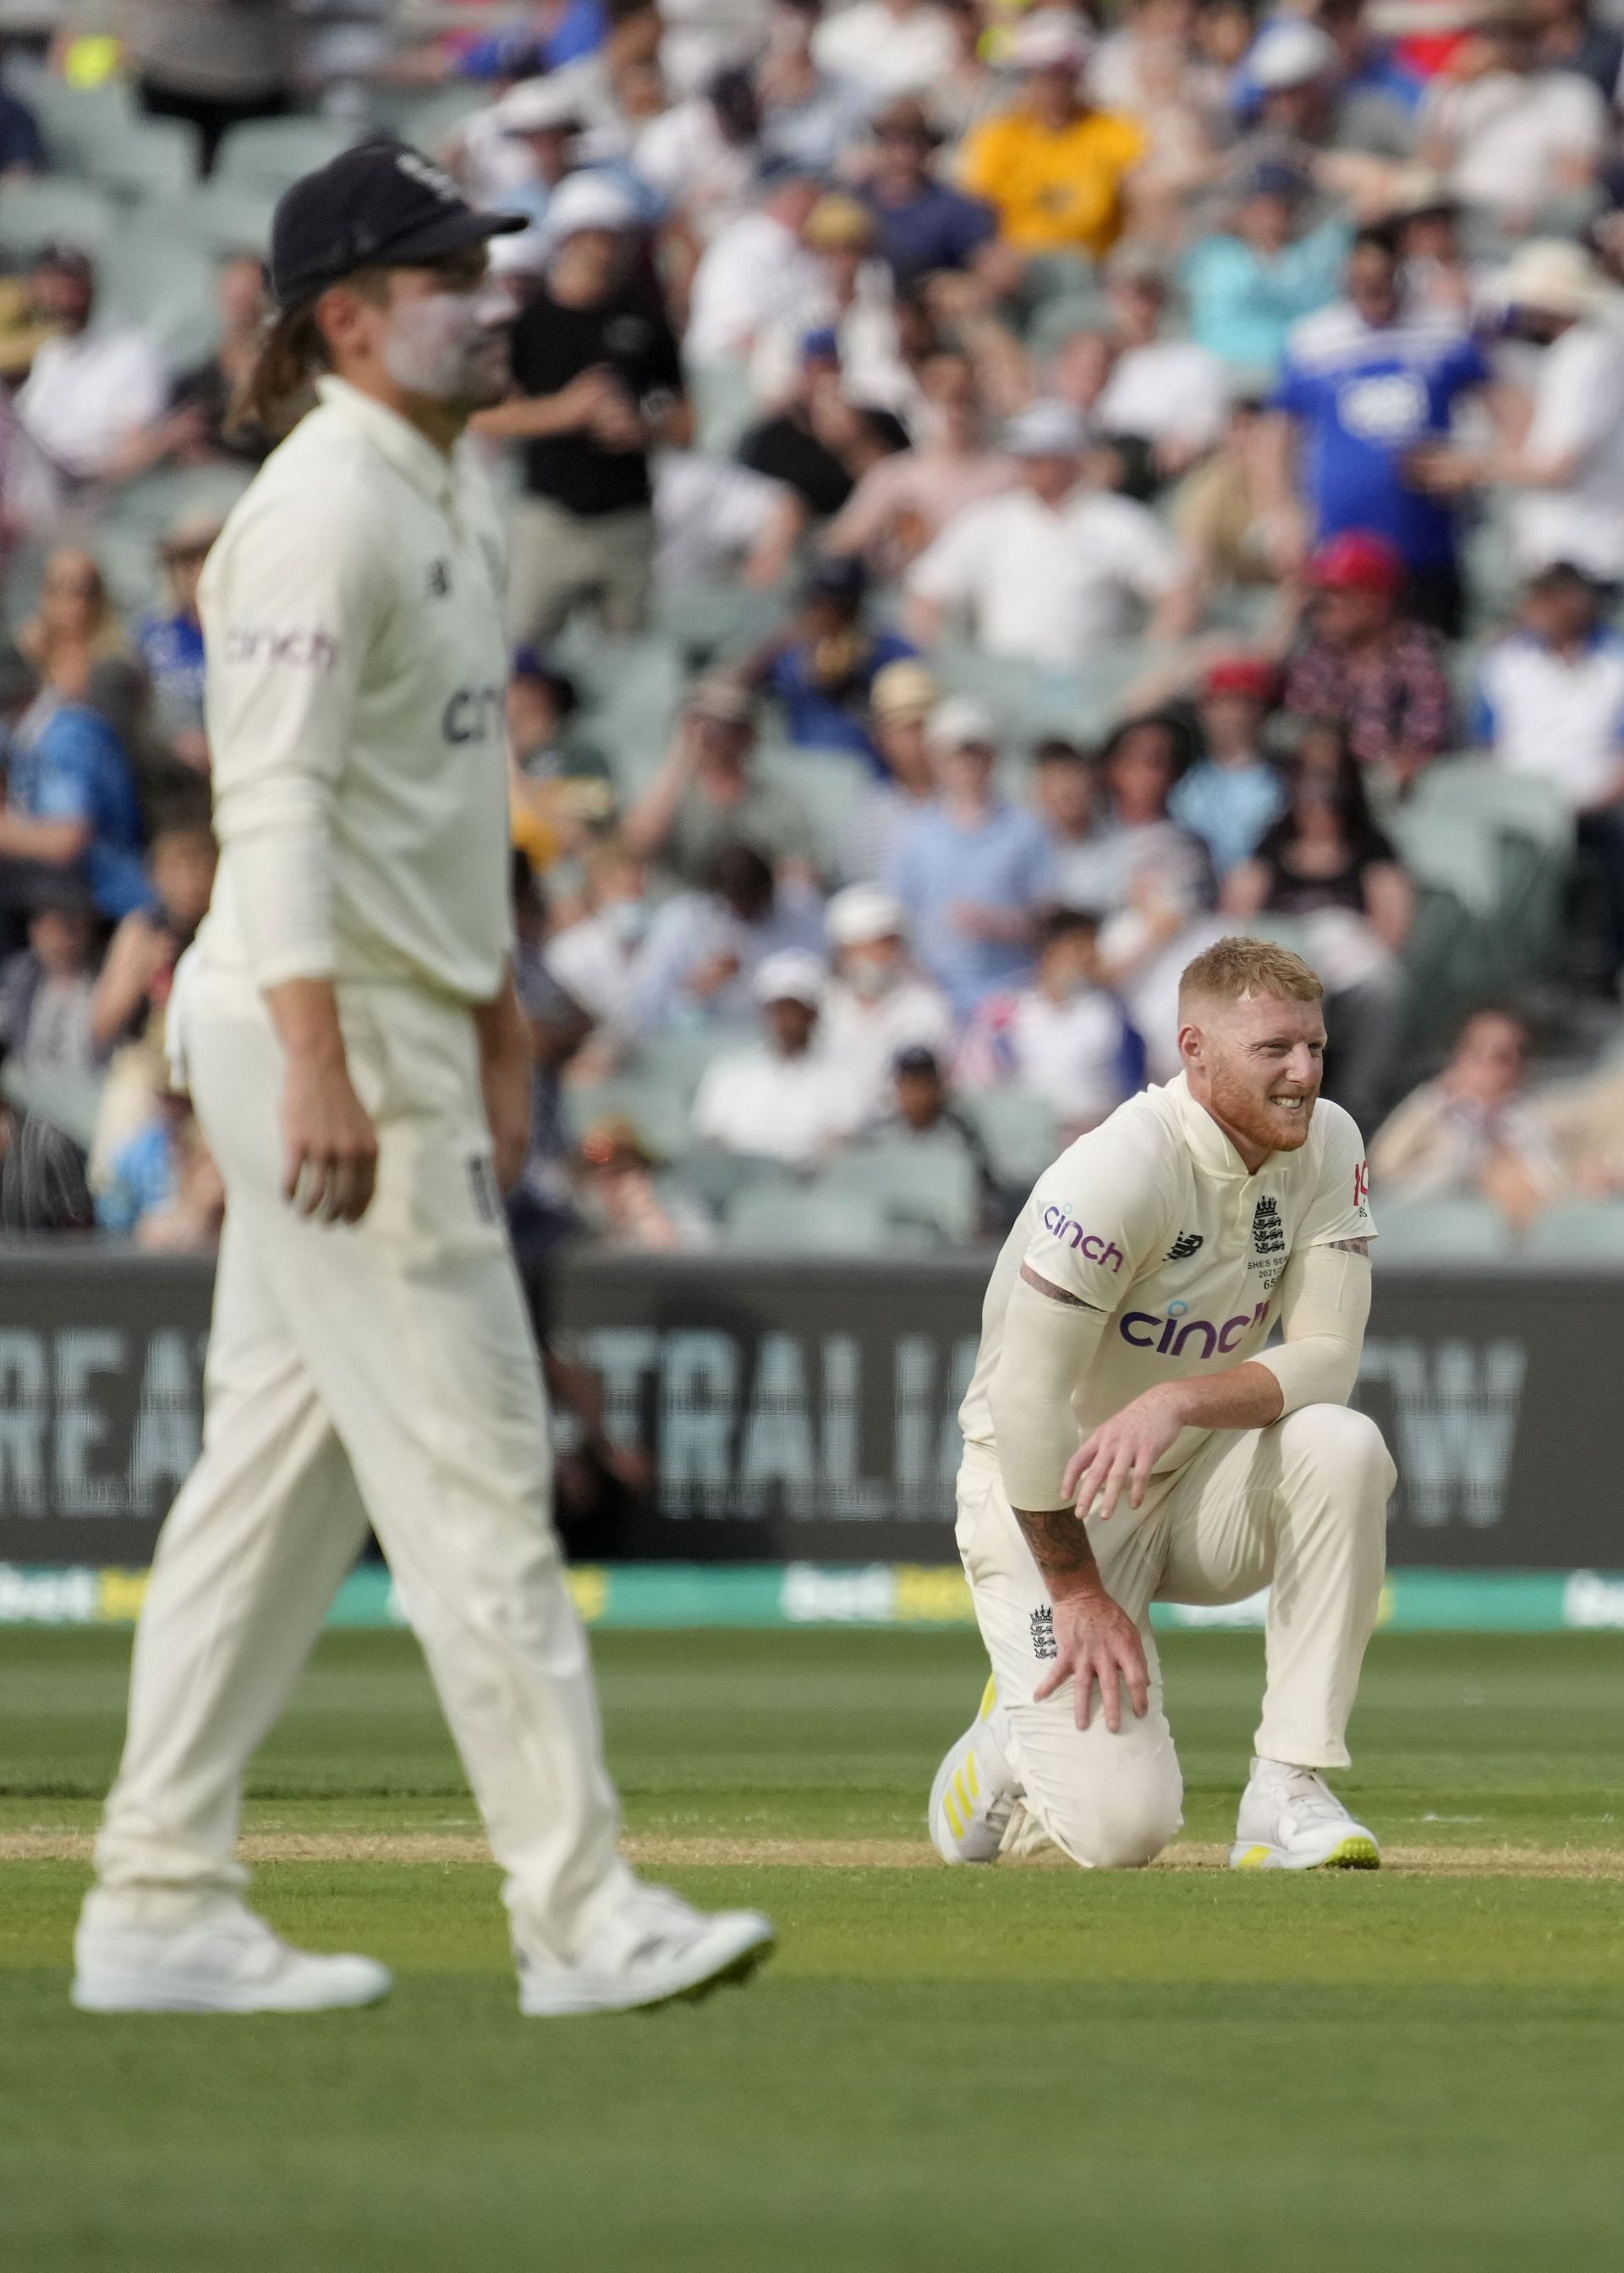 Ben Stokes and Ollie Robinson gave some injury scare due to lack of game time, as they suffered from cramps and dehydration.